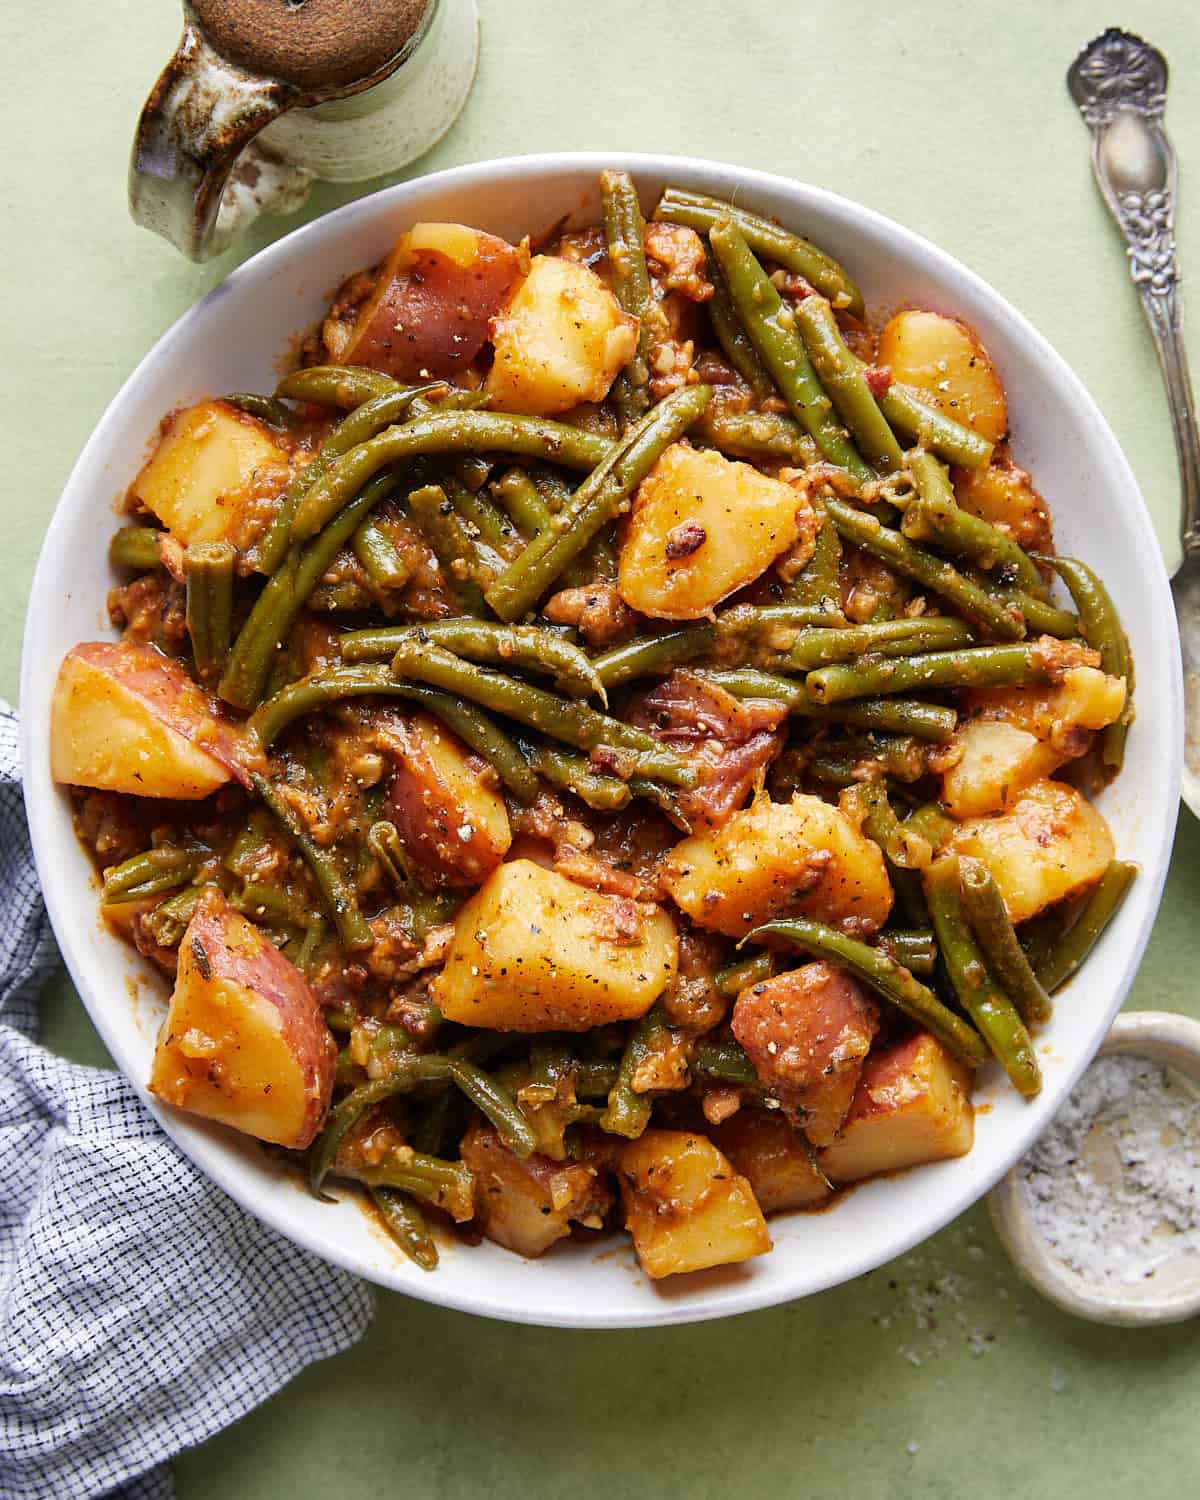 Overhead image of green beans and potatoes recipe.